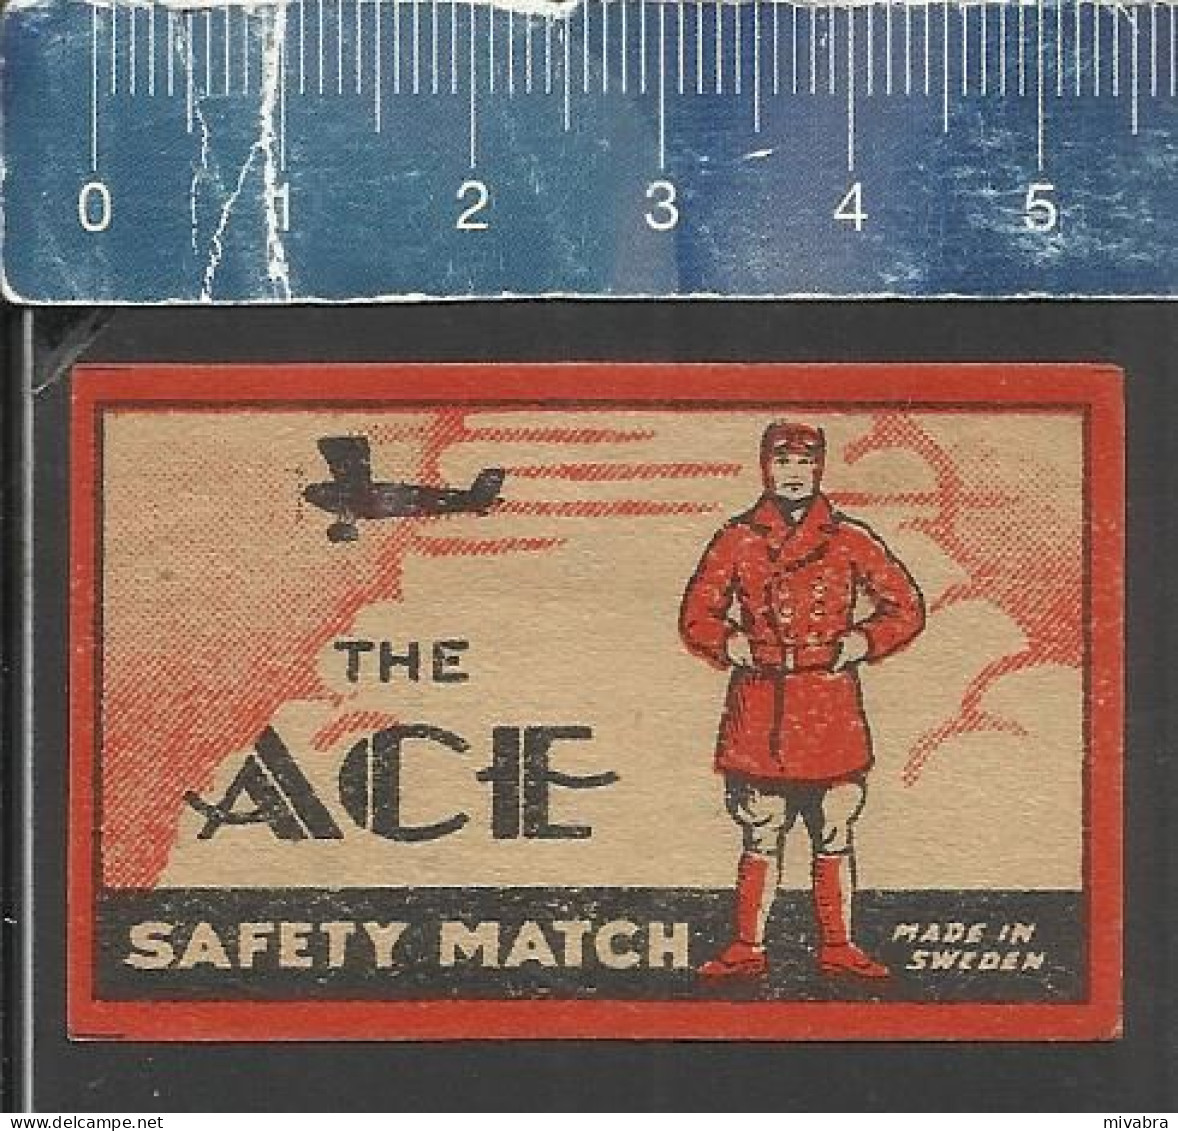 THE ACE (flying Ace Fighter Ace Or Air Ace Is A Military Aviator Shooting Down Enemy Aircraft) OLD MATCHBOX LABEL SWEDEN - Zündholzschachteletiketten